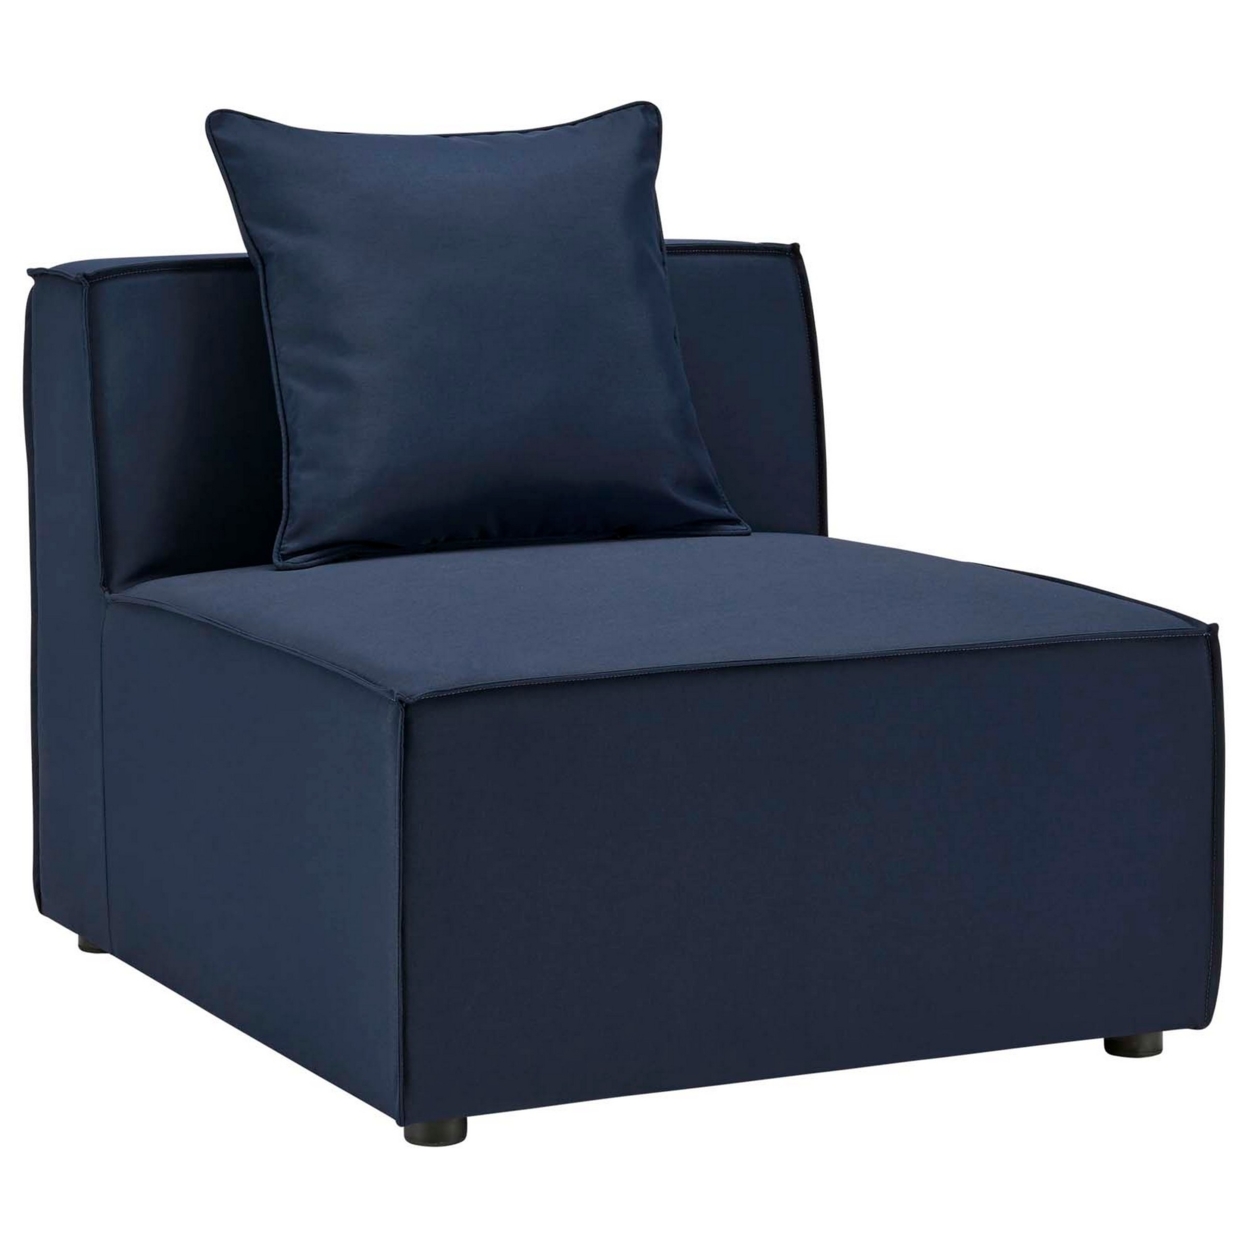 Saybrook Outdoor Patio Upholstered Sectional Sofa Armless Chair, Navy Blue